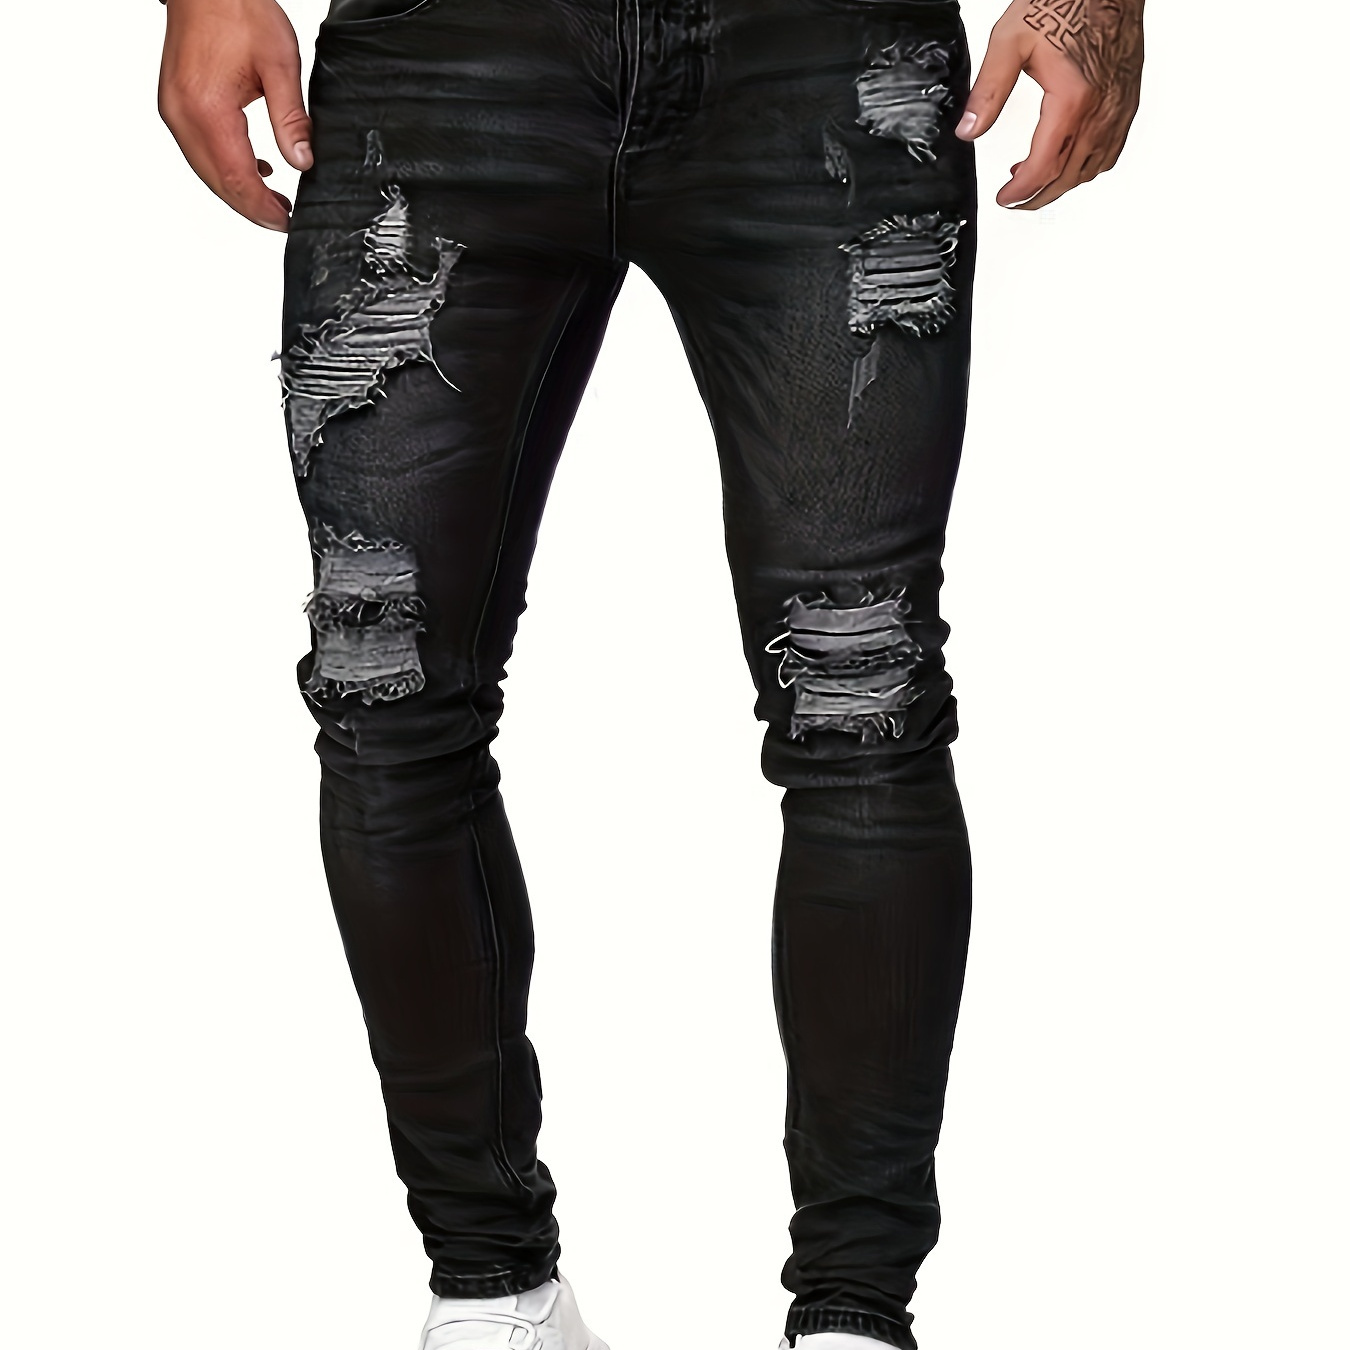 

Men's Casual Ripped Skinny Jeans, Chic Street Style Stretch Denim Pants